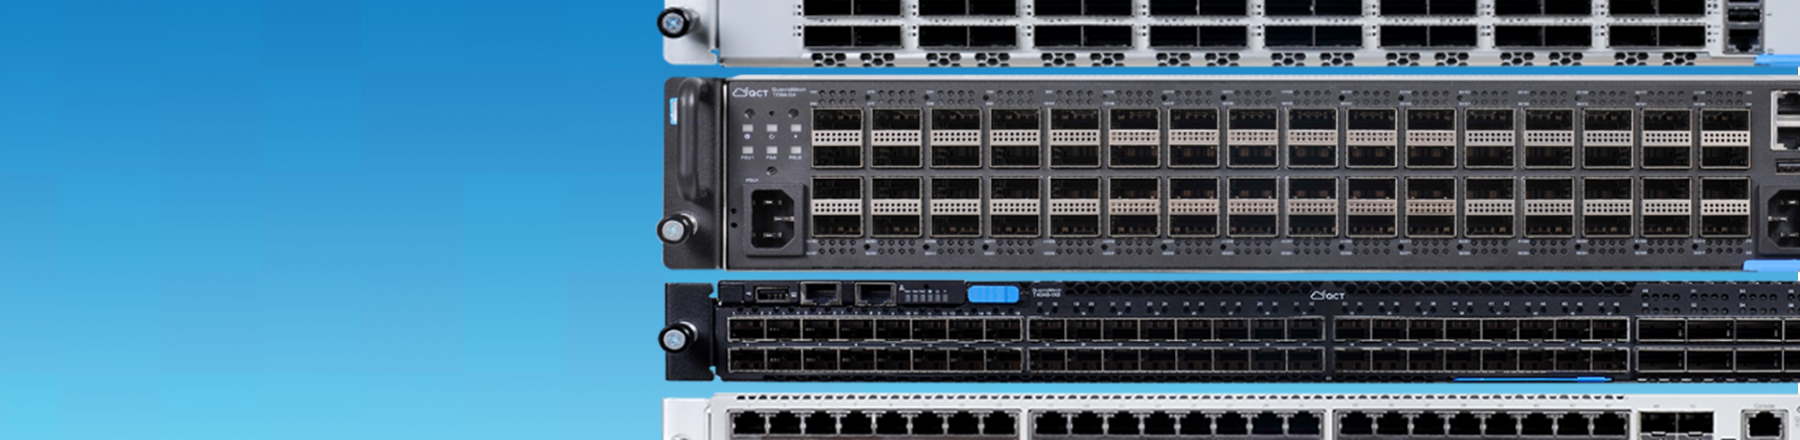 Networking - Ethernet & Bare Metal Switches